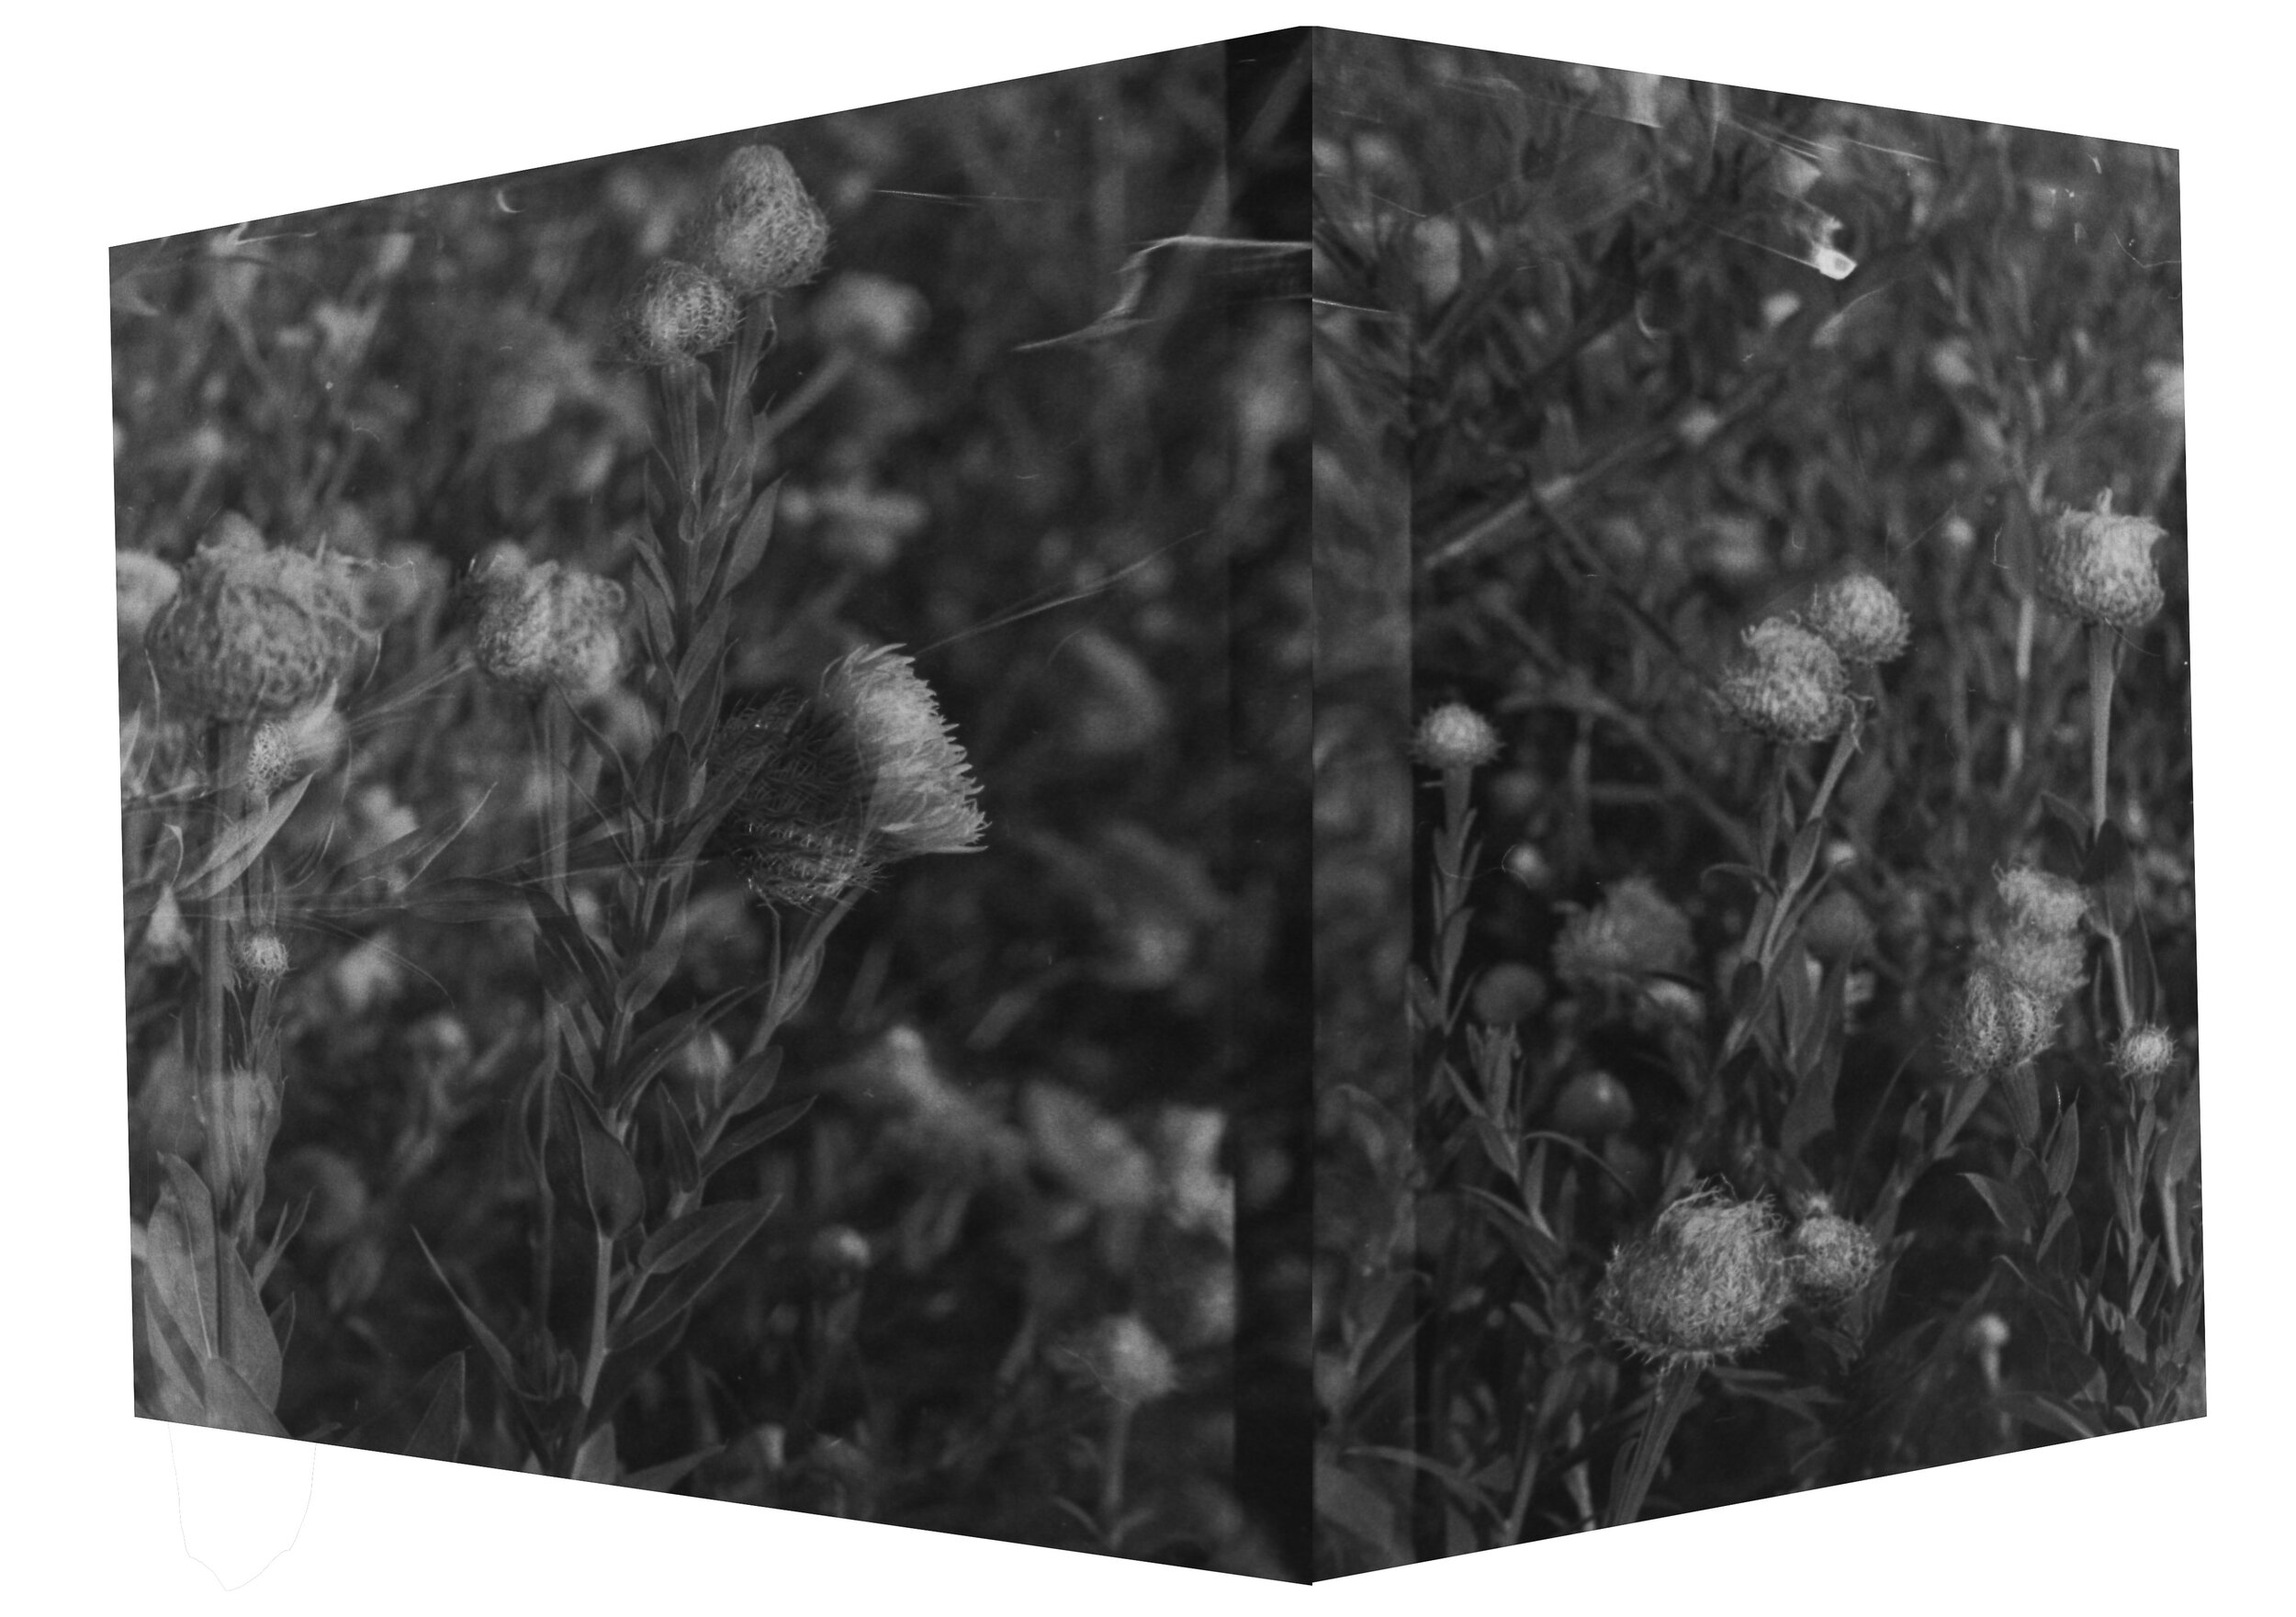 Sculptural Meadow, Printed Photograph, 2020, 11X17in, $35